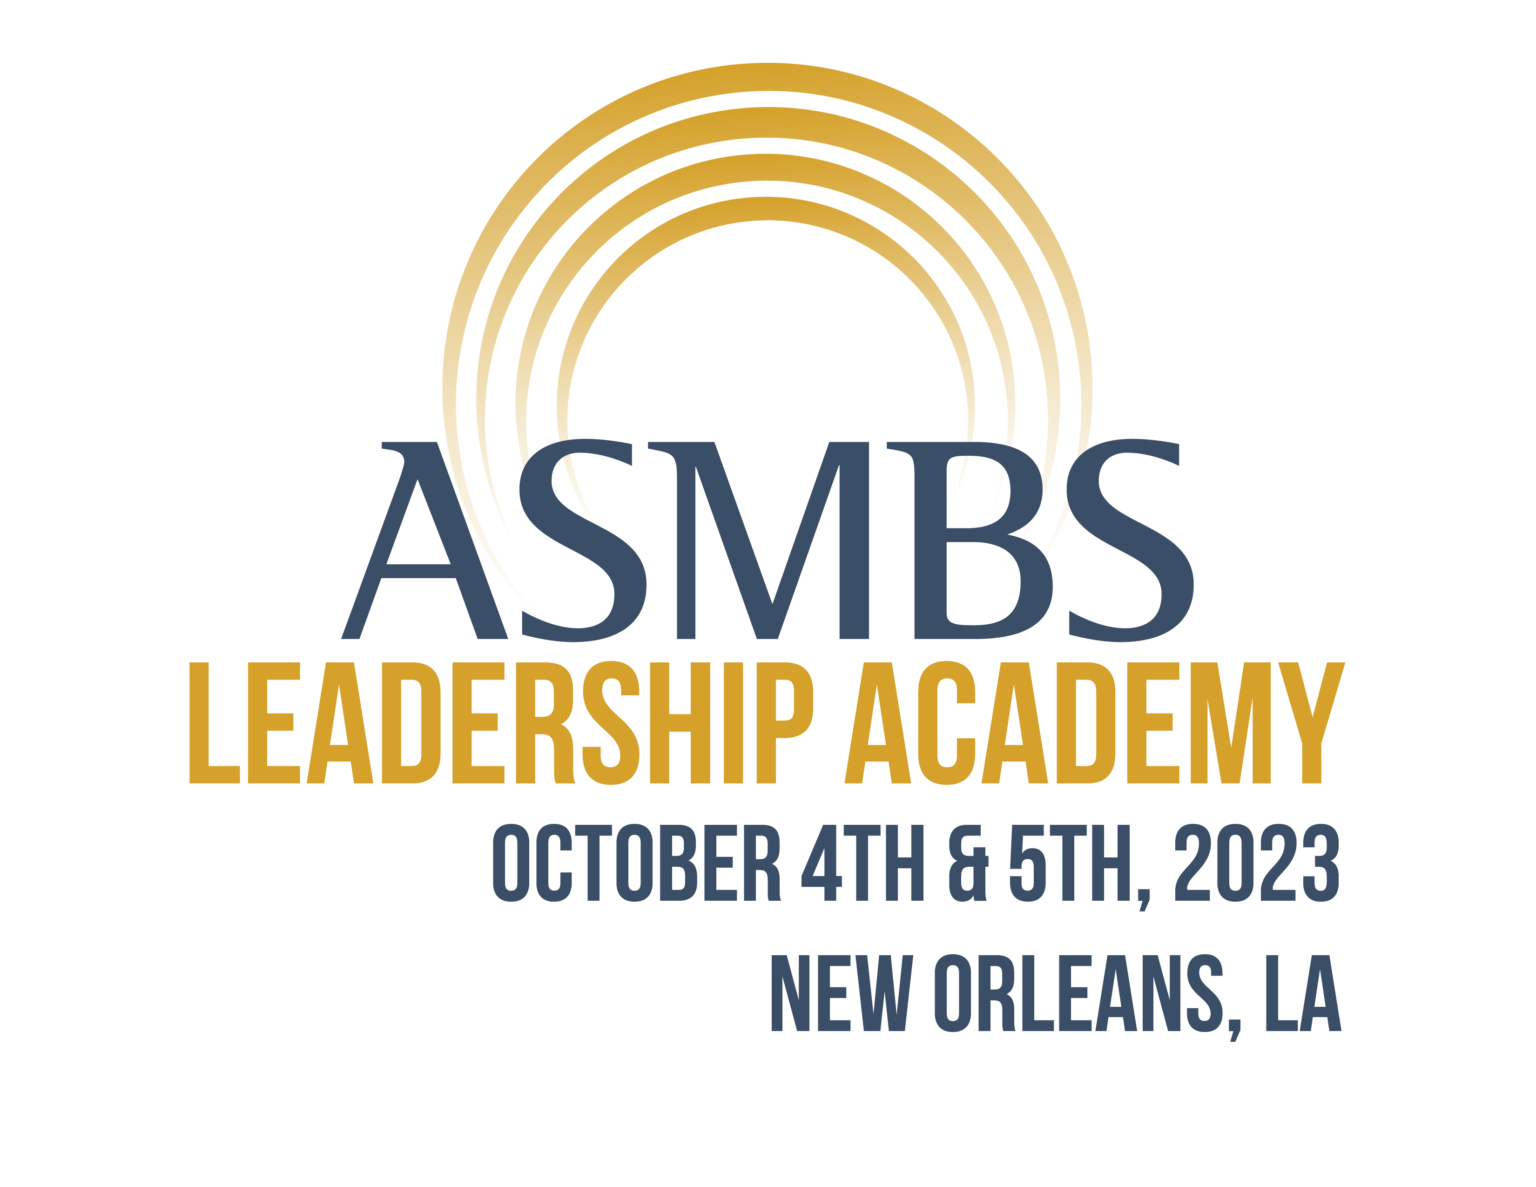 ASMBS Leadership Academy American Society for Metabolic and Bariatric